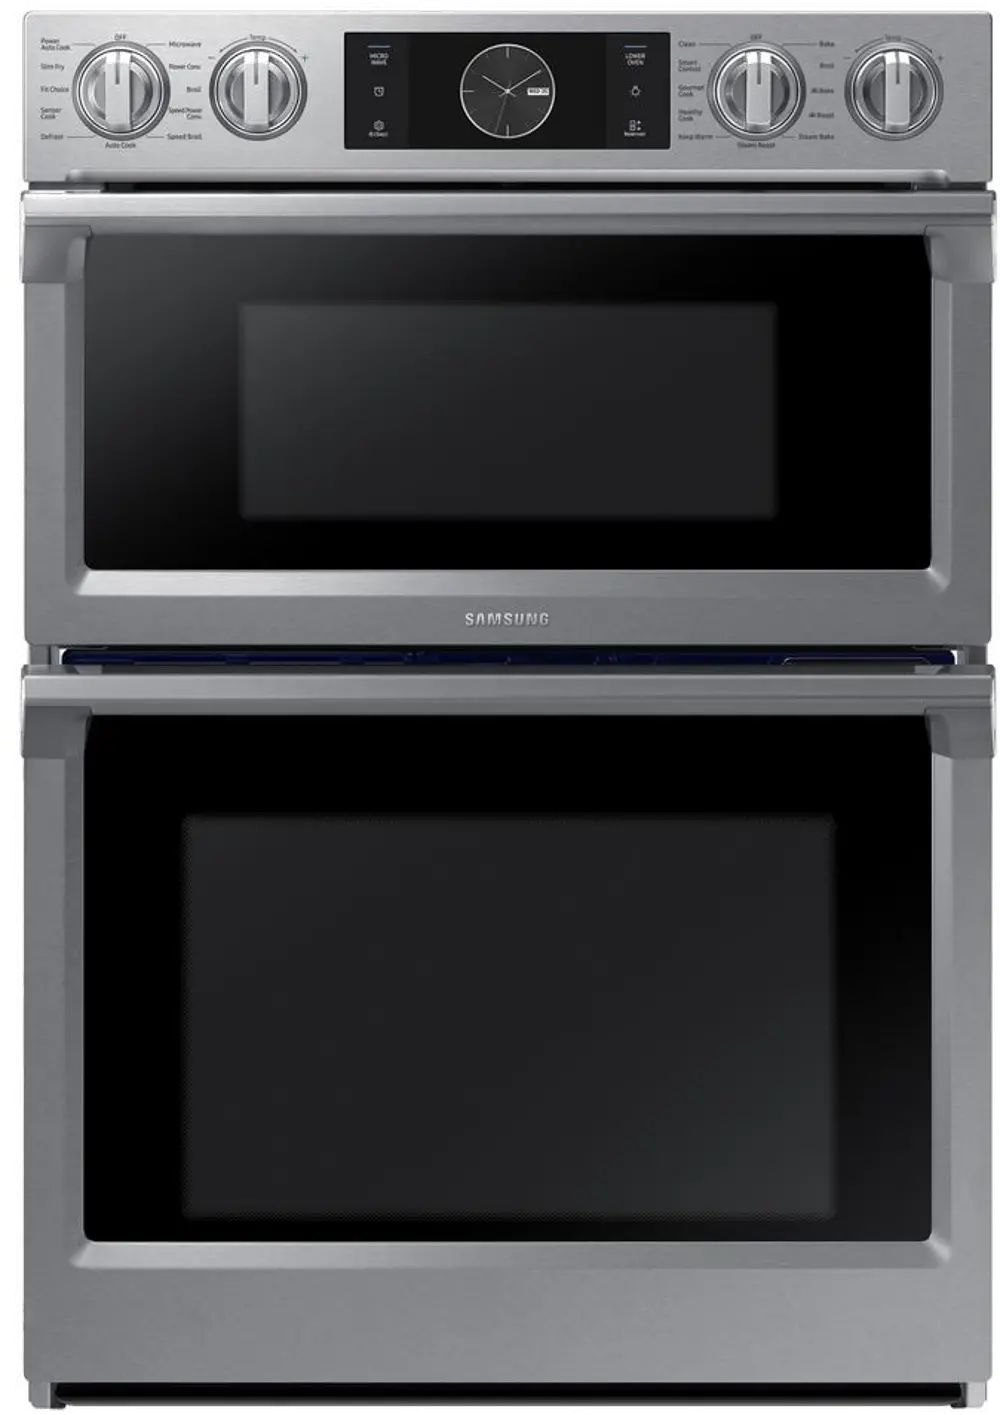 NQ70M7770DS Samsung 7 cu ft Combination Wall Oven - Stainless Steel 30 Inch-1